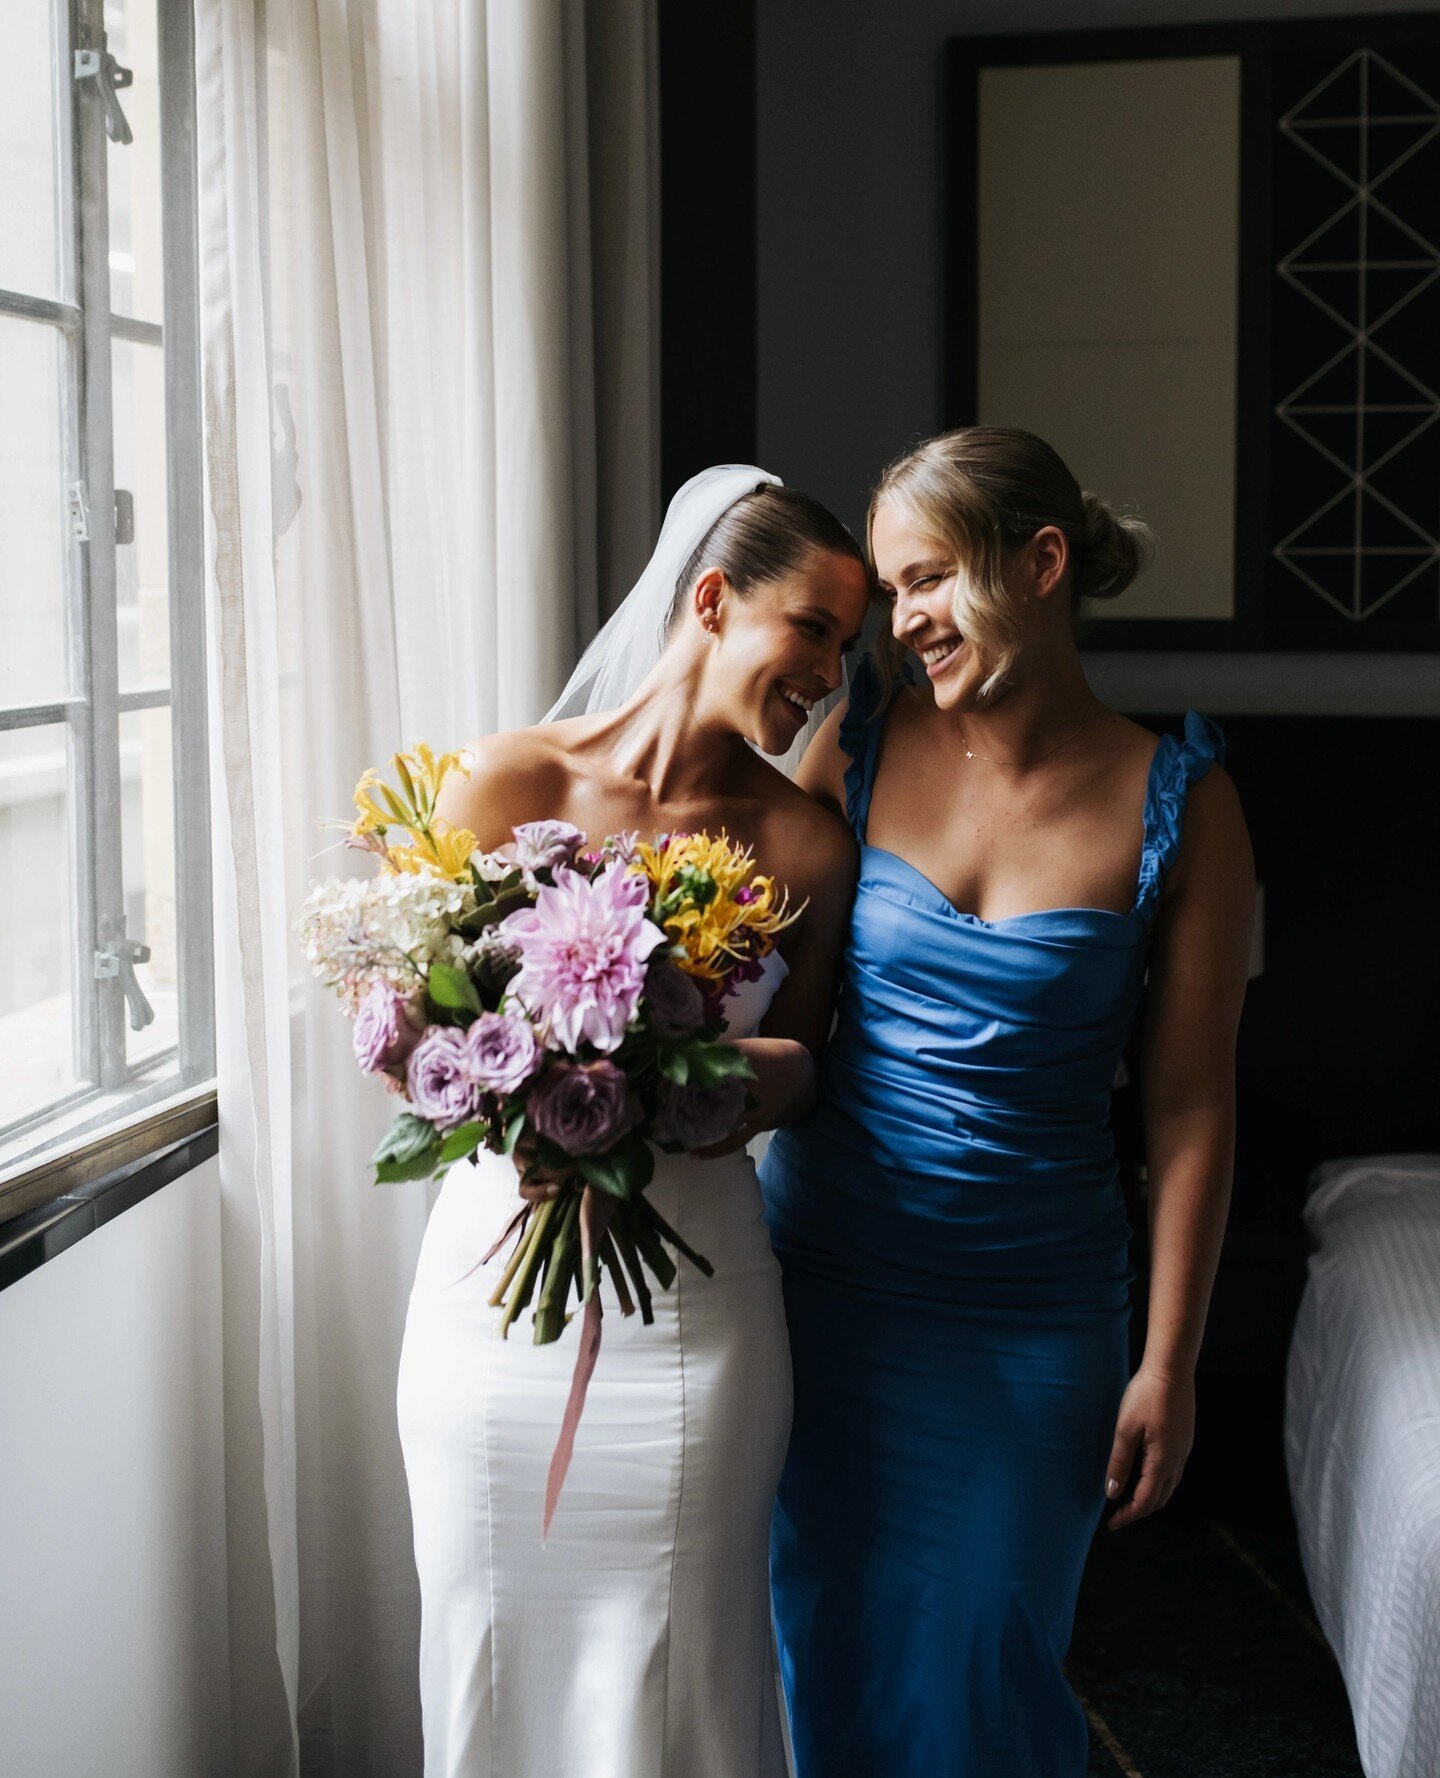 We're swooning over this gorgeous @_anti_bride Real Wedding feature on Taylor &amp; Remi. Hair by @carlyvandermeerhair and makeup by #TFMtalent @katiemooremakeup⁠
⁠
Photographer: @damienmilan_photographer⁠
Taylor&rsquo;s Wedding Dress: @brides_for_a_